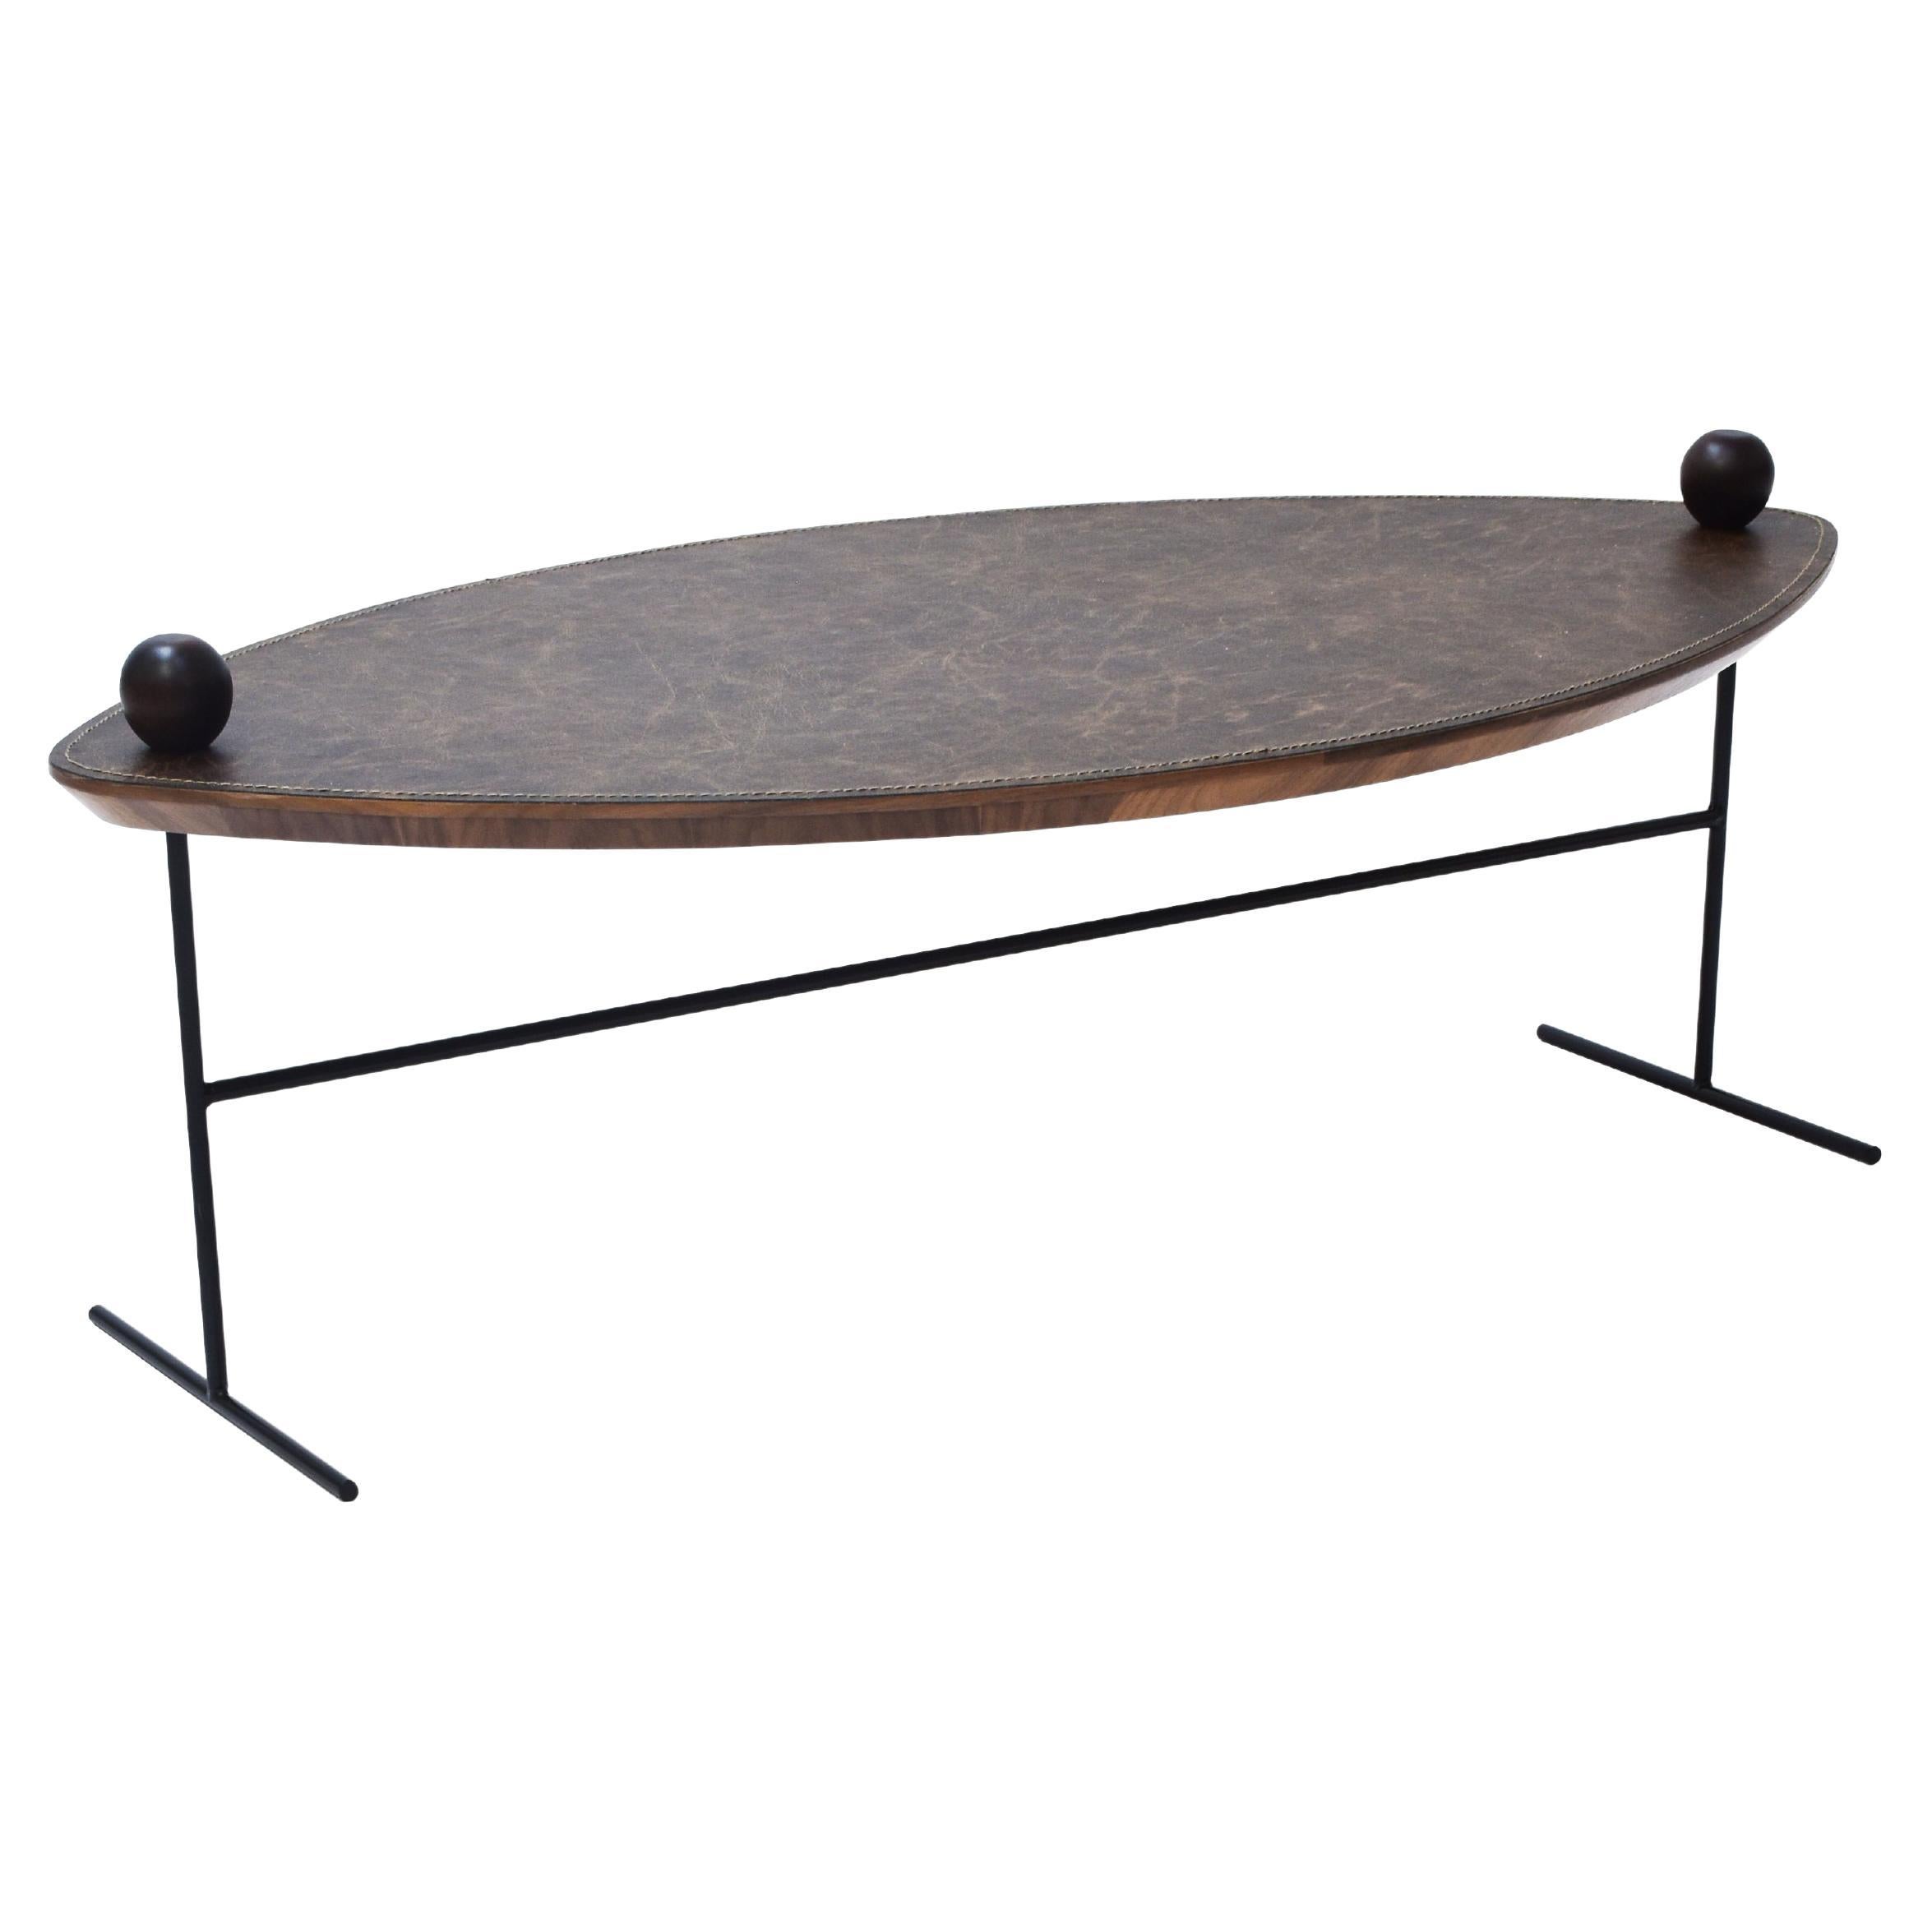 "Leaf" Center Table in Golden Carbon Steel and Leather Covered Top For Sale